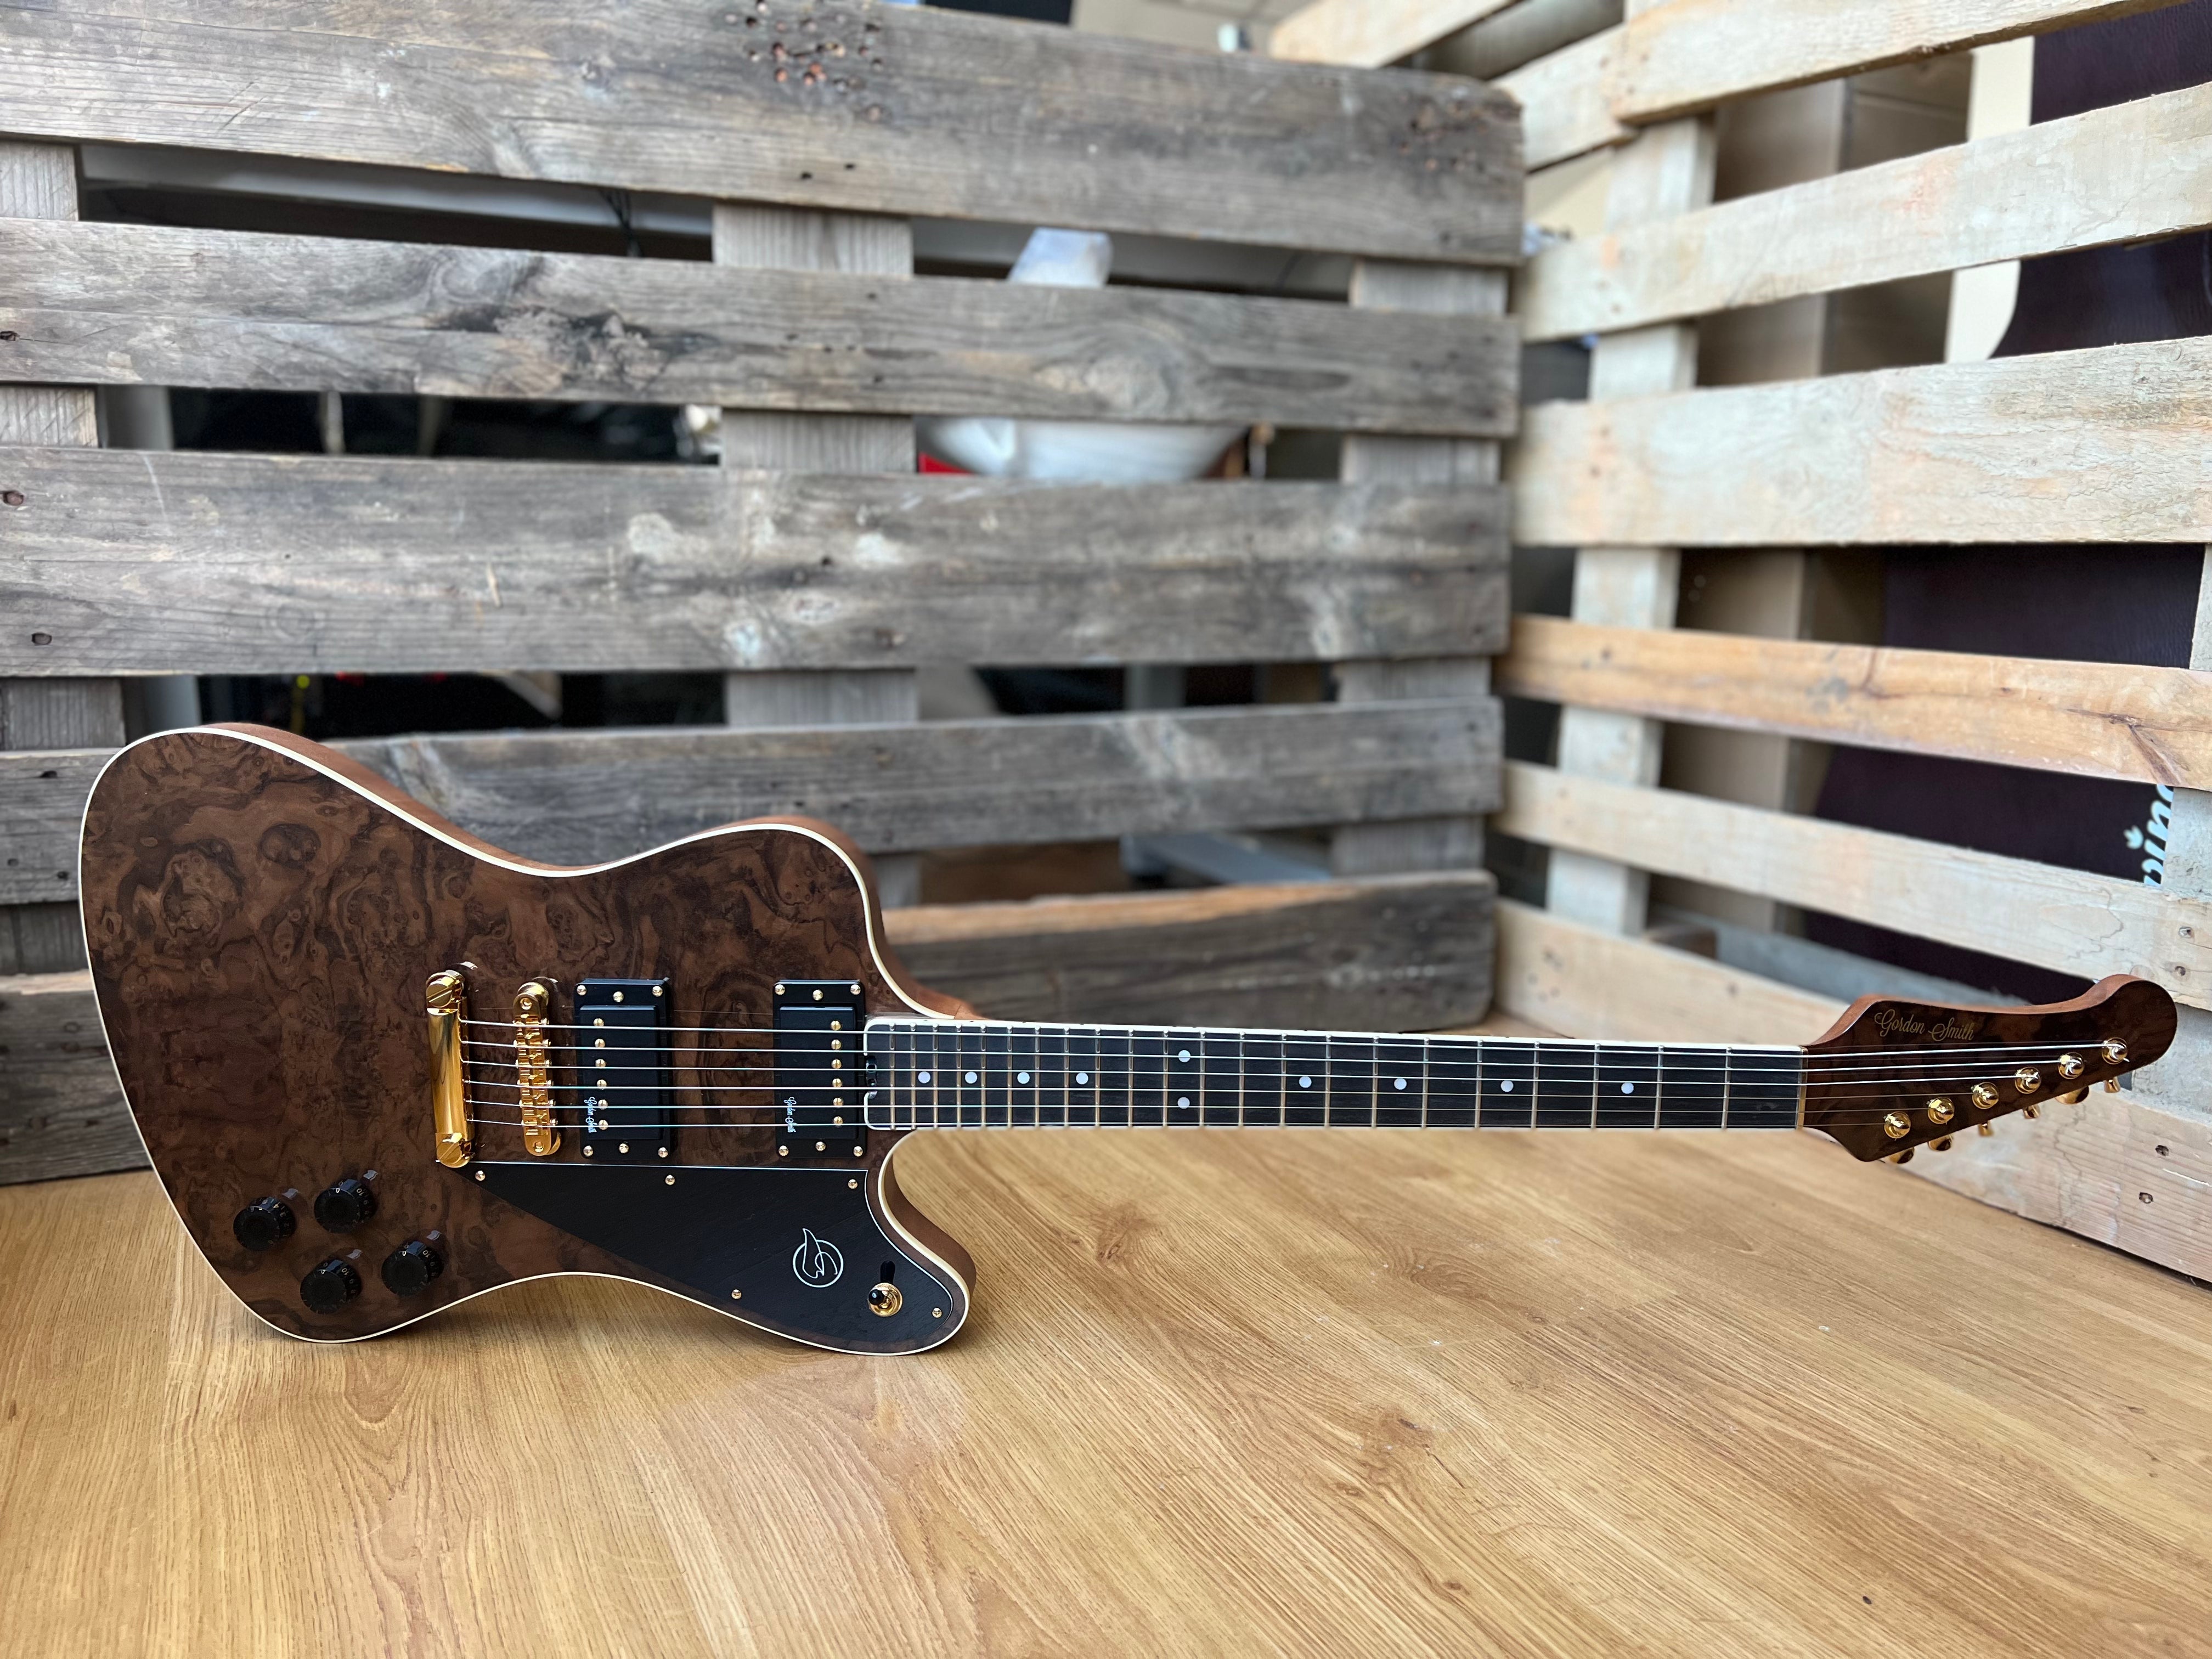 Gordon Smith Griffin Deluxe Burled Walnut Custom, Electric Guitar for sale at Richards Guitars.